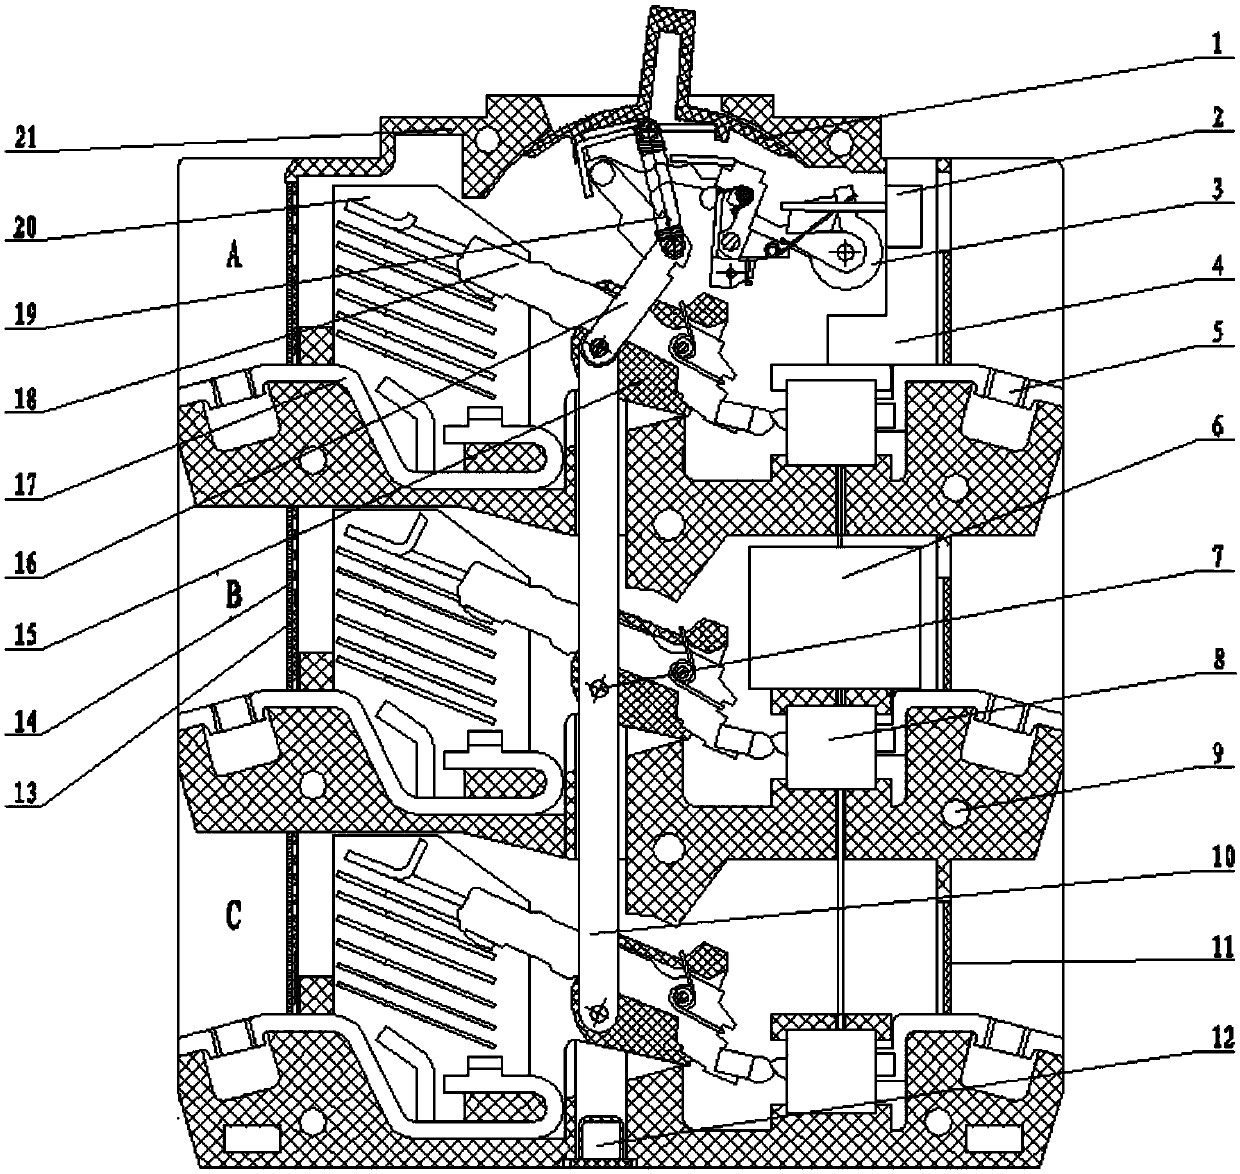 Circuit breaker with vertical structure